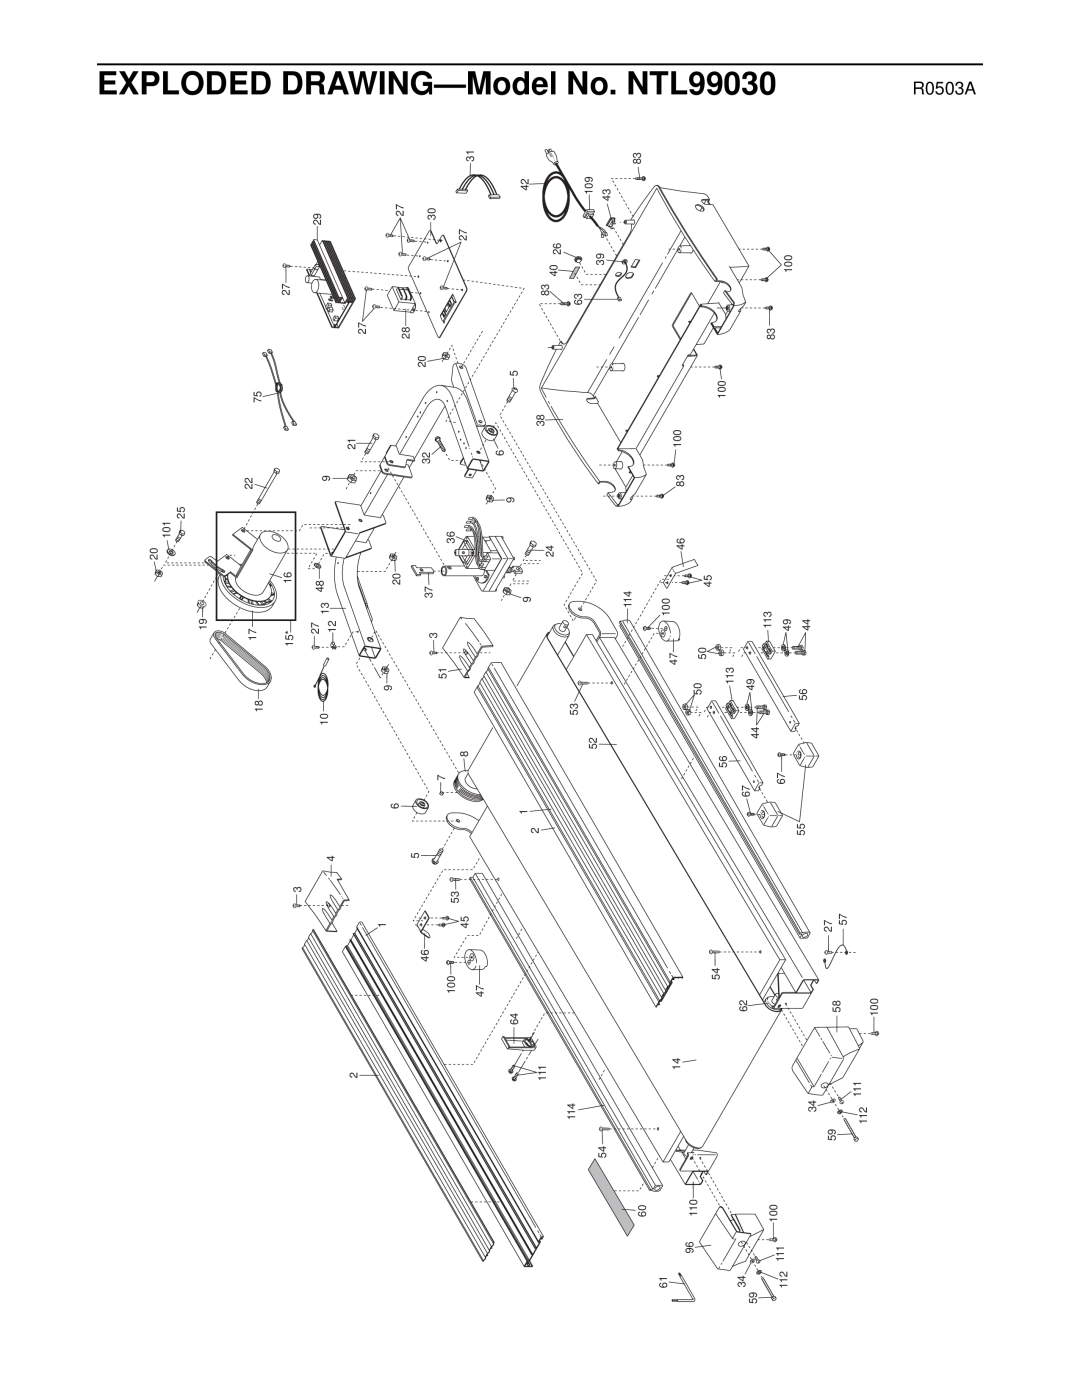 NordicTrack user manual EXPLODED DRAWING-Model No. NTL99030, R0503A 